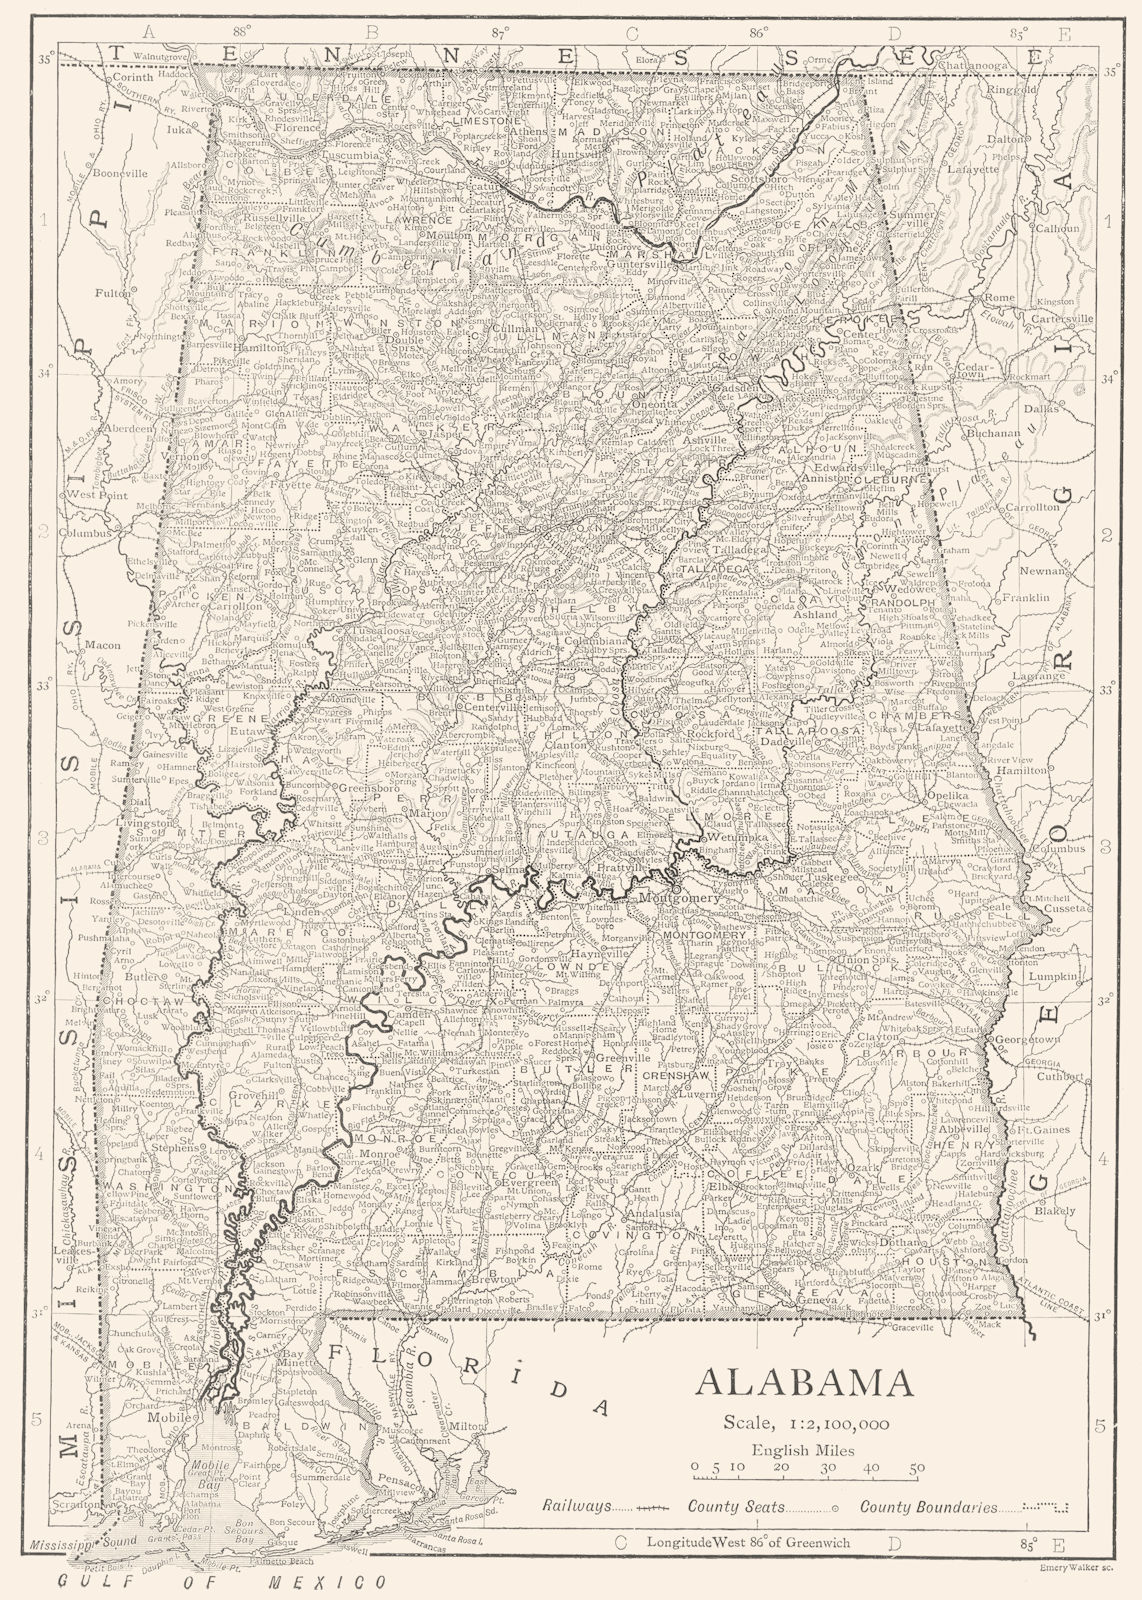 Associate Product ALABAMA. Alabama state map showing counties 1910 old antique plan chart